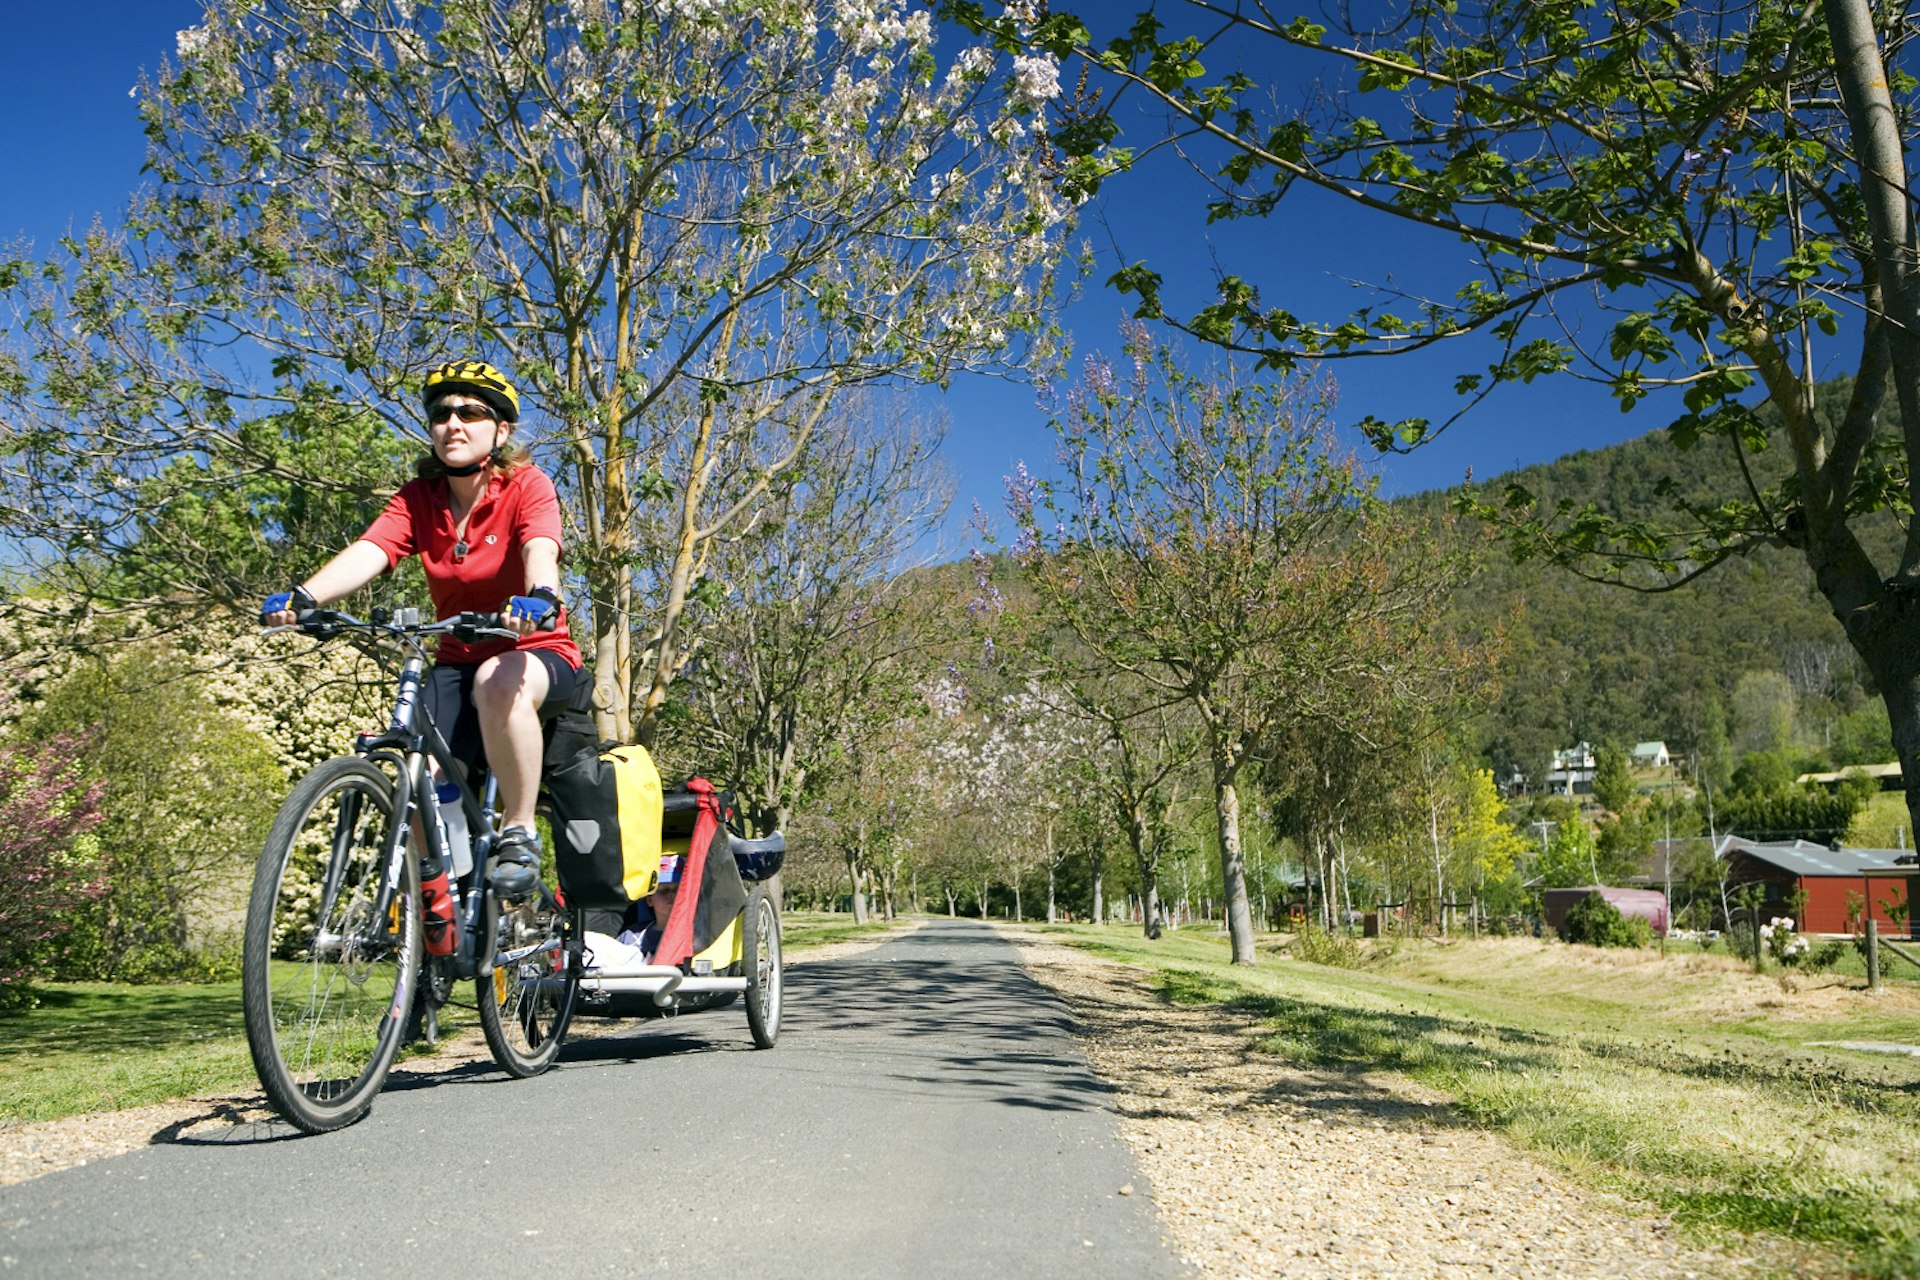 Rail trails make for family friendly cycling trips. © Andrew Bain / Getty Images